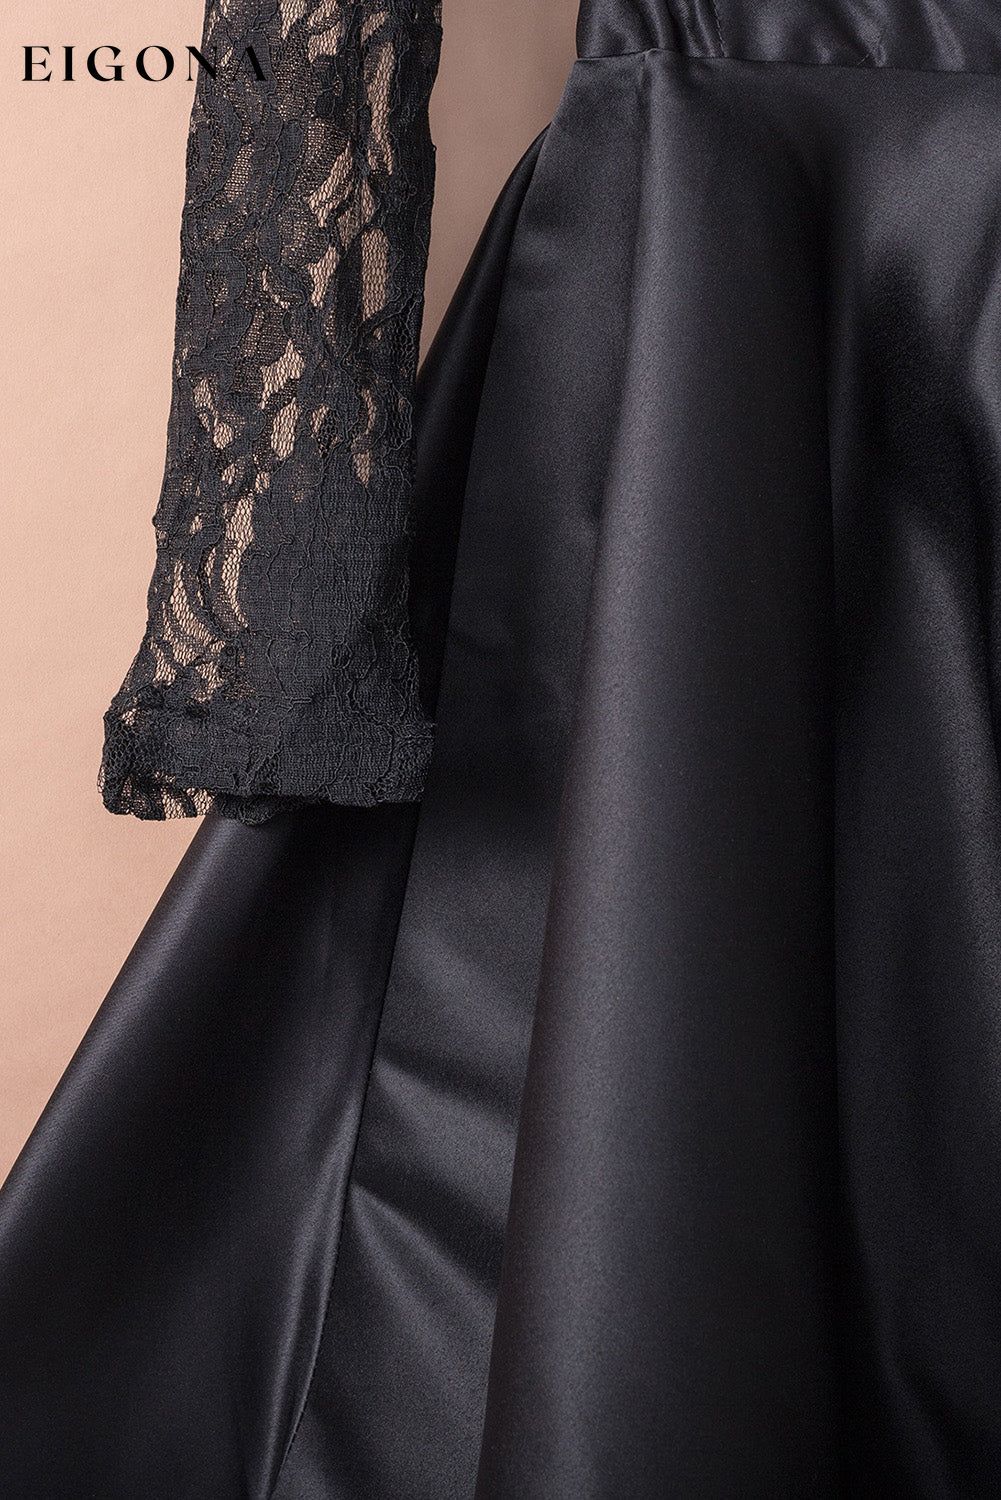 Black Long Sleeve Lace High Low Long Sleeve Satin Evening Dress clothes DL Exclusive dress dresses evening dress evening dresses Evening Dresses Wholesale Fabric Lace Fabric Satin formal dresses Lace maxi dress Occasion Wedding Prom Season Four Seasons Style Elegant